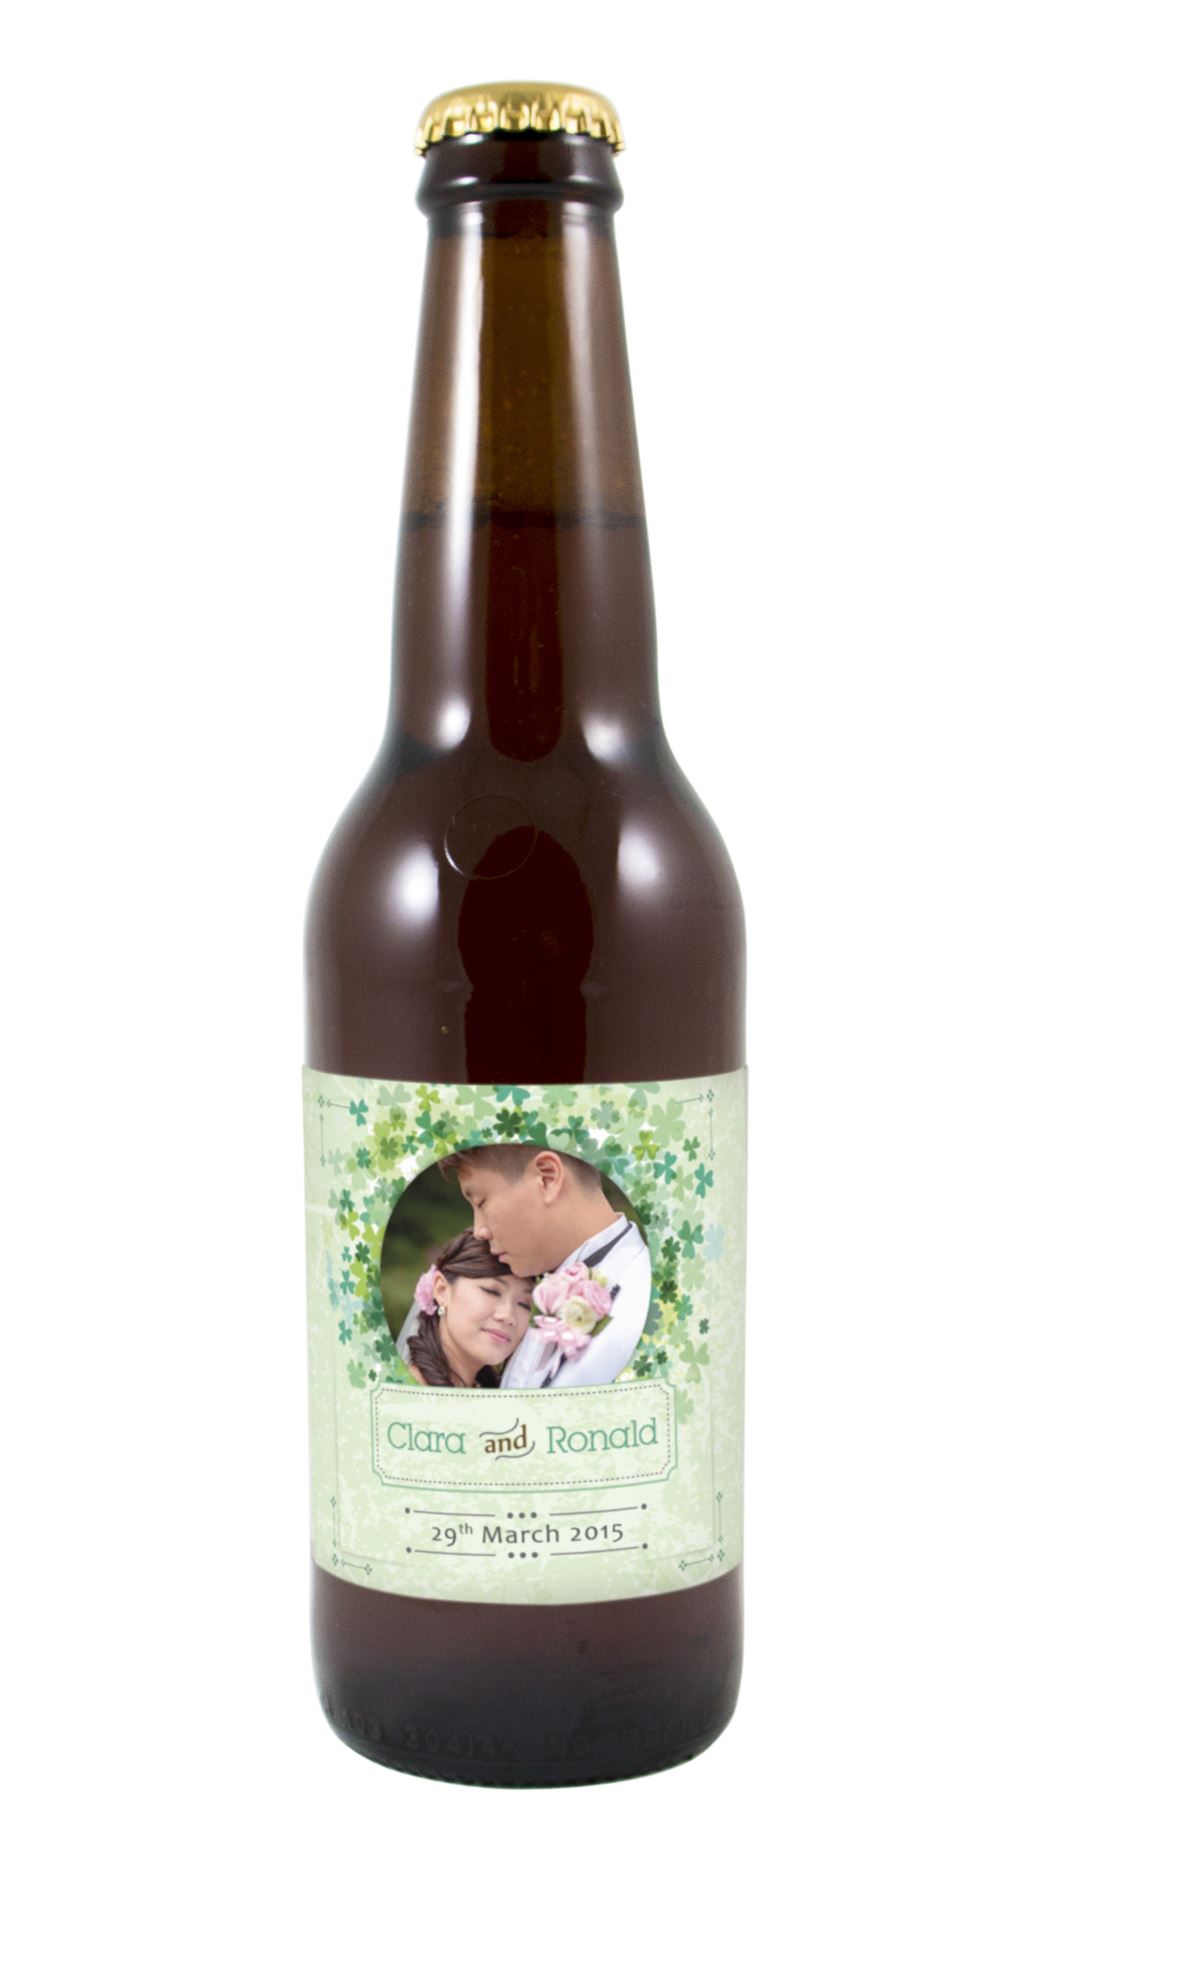 Personalising labels for beer or wine is a great gender neutral gift idea. Image: Brewtopia